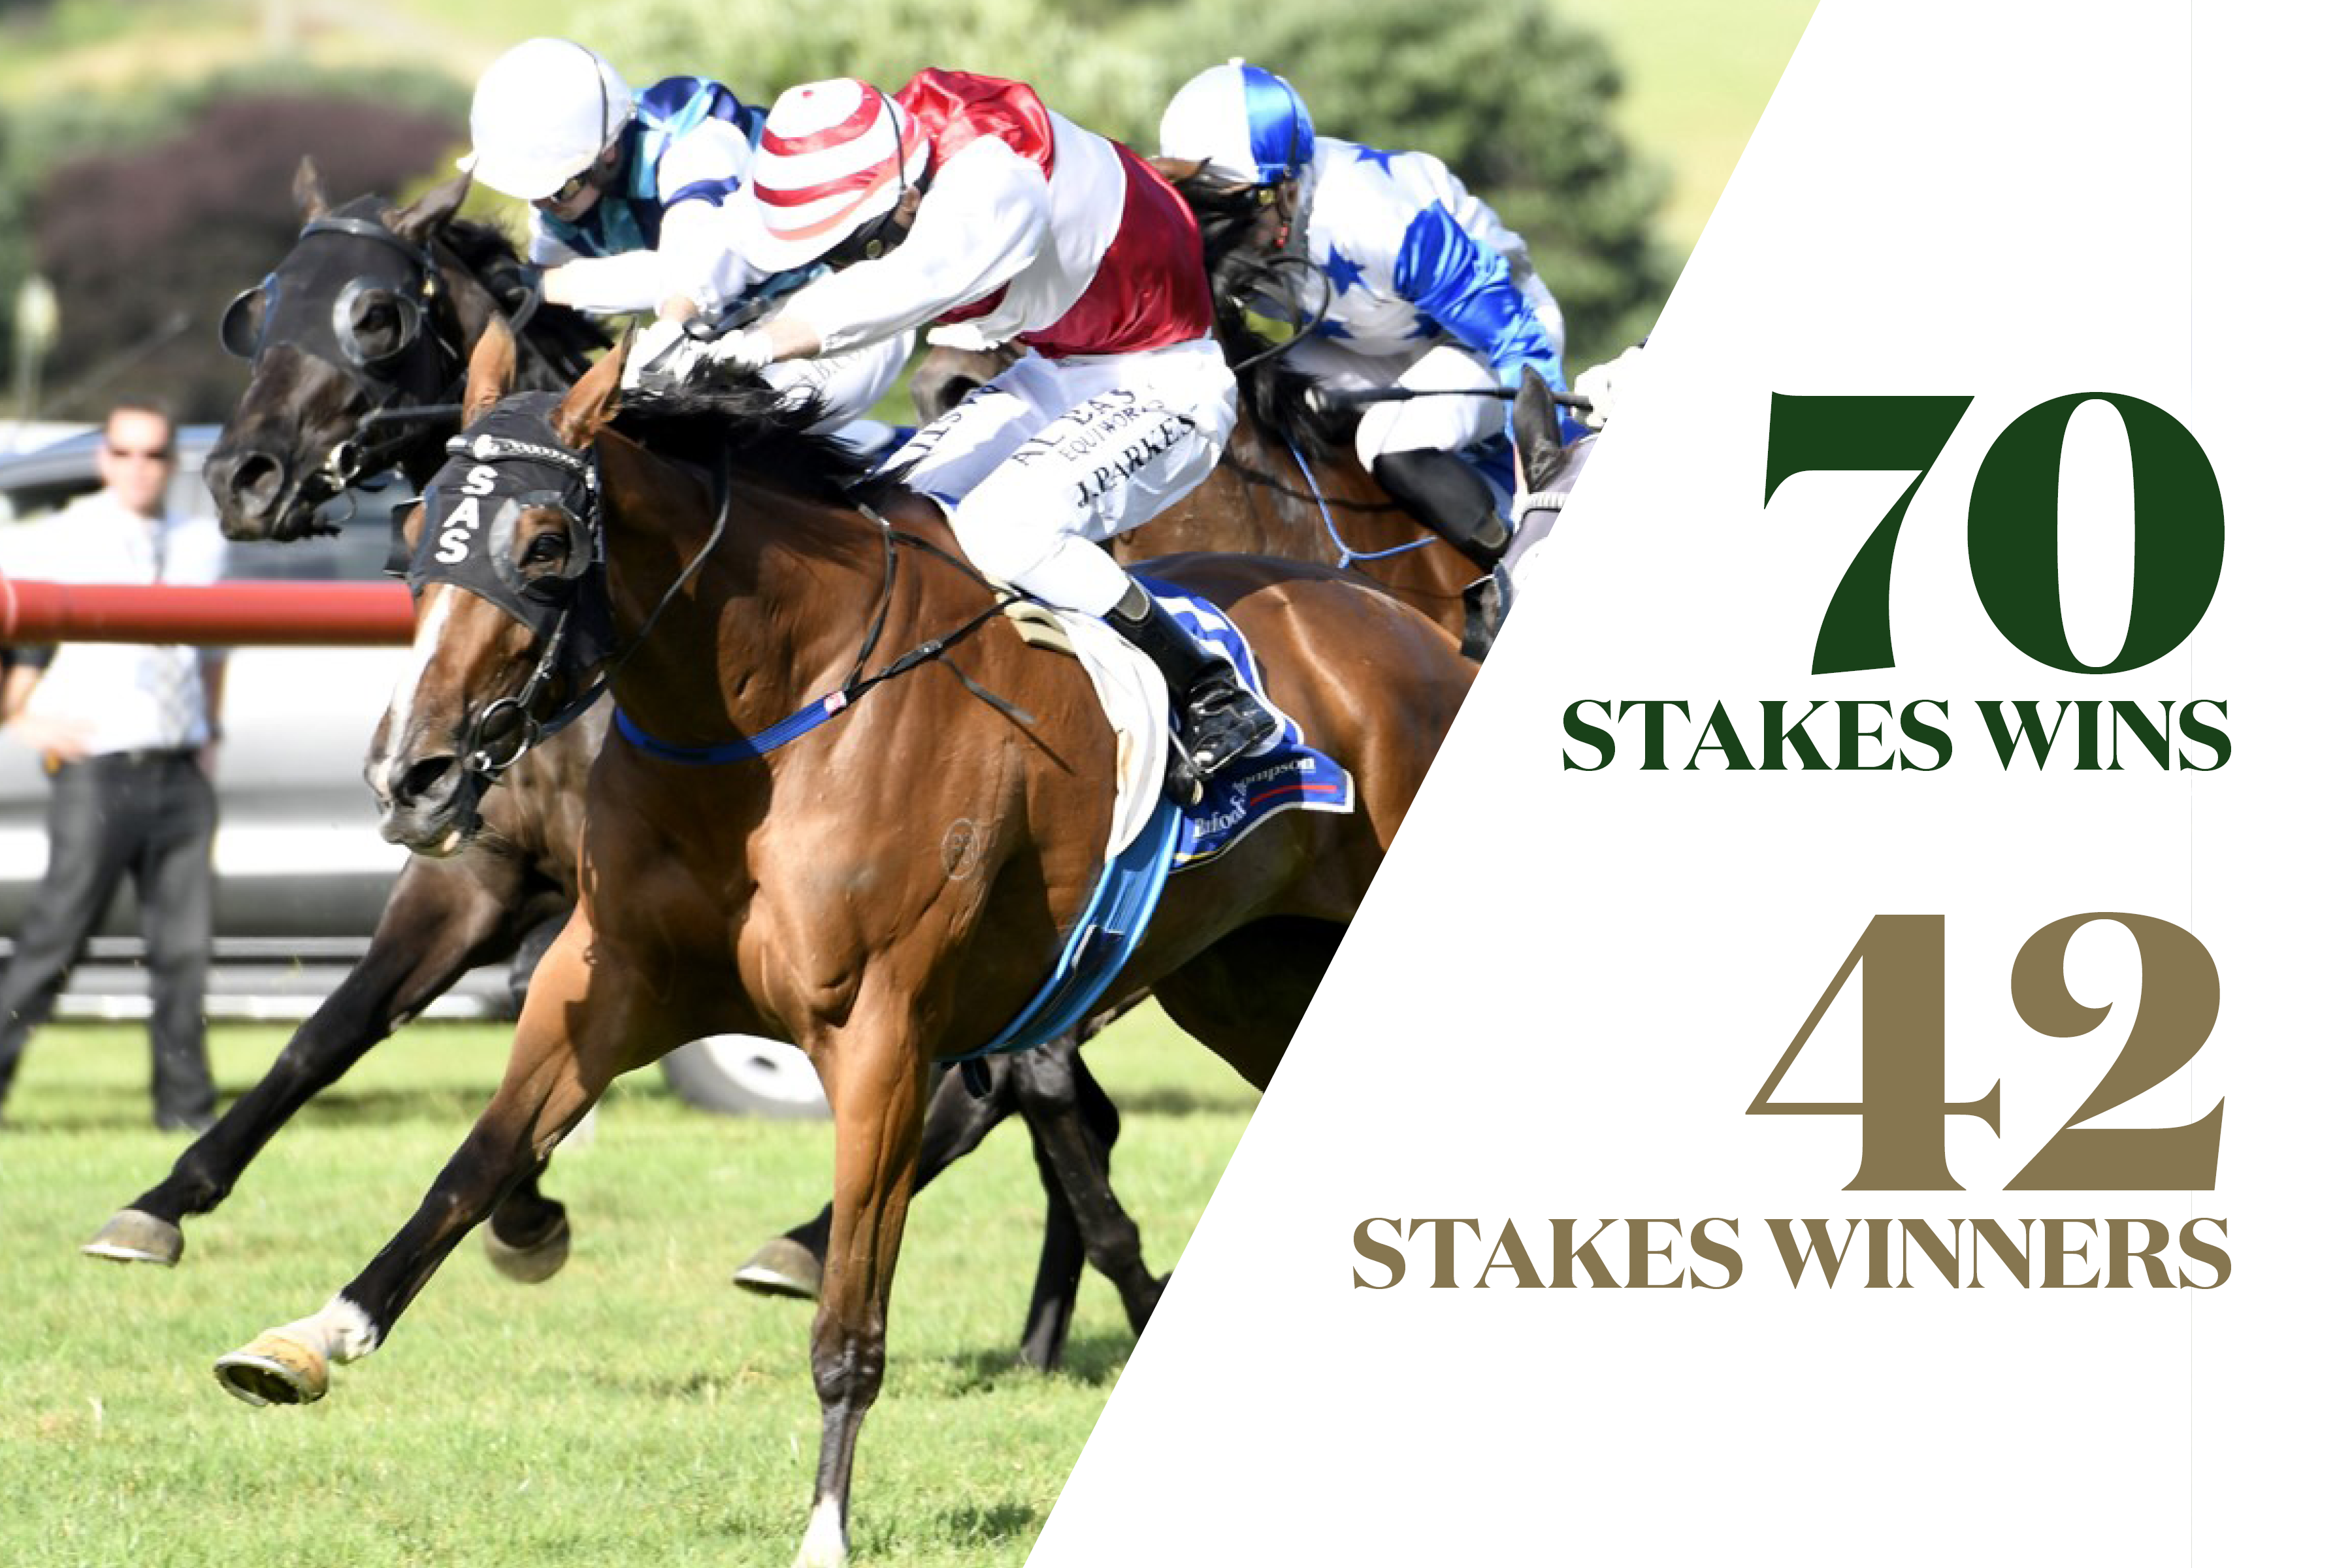 43 graduates of the Sale have claimed 71 stakes wins in the last five seasons. 